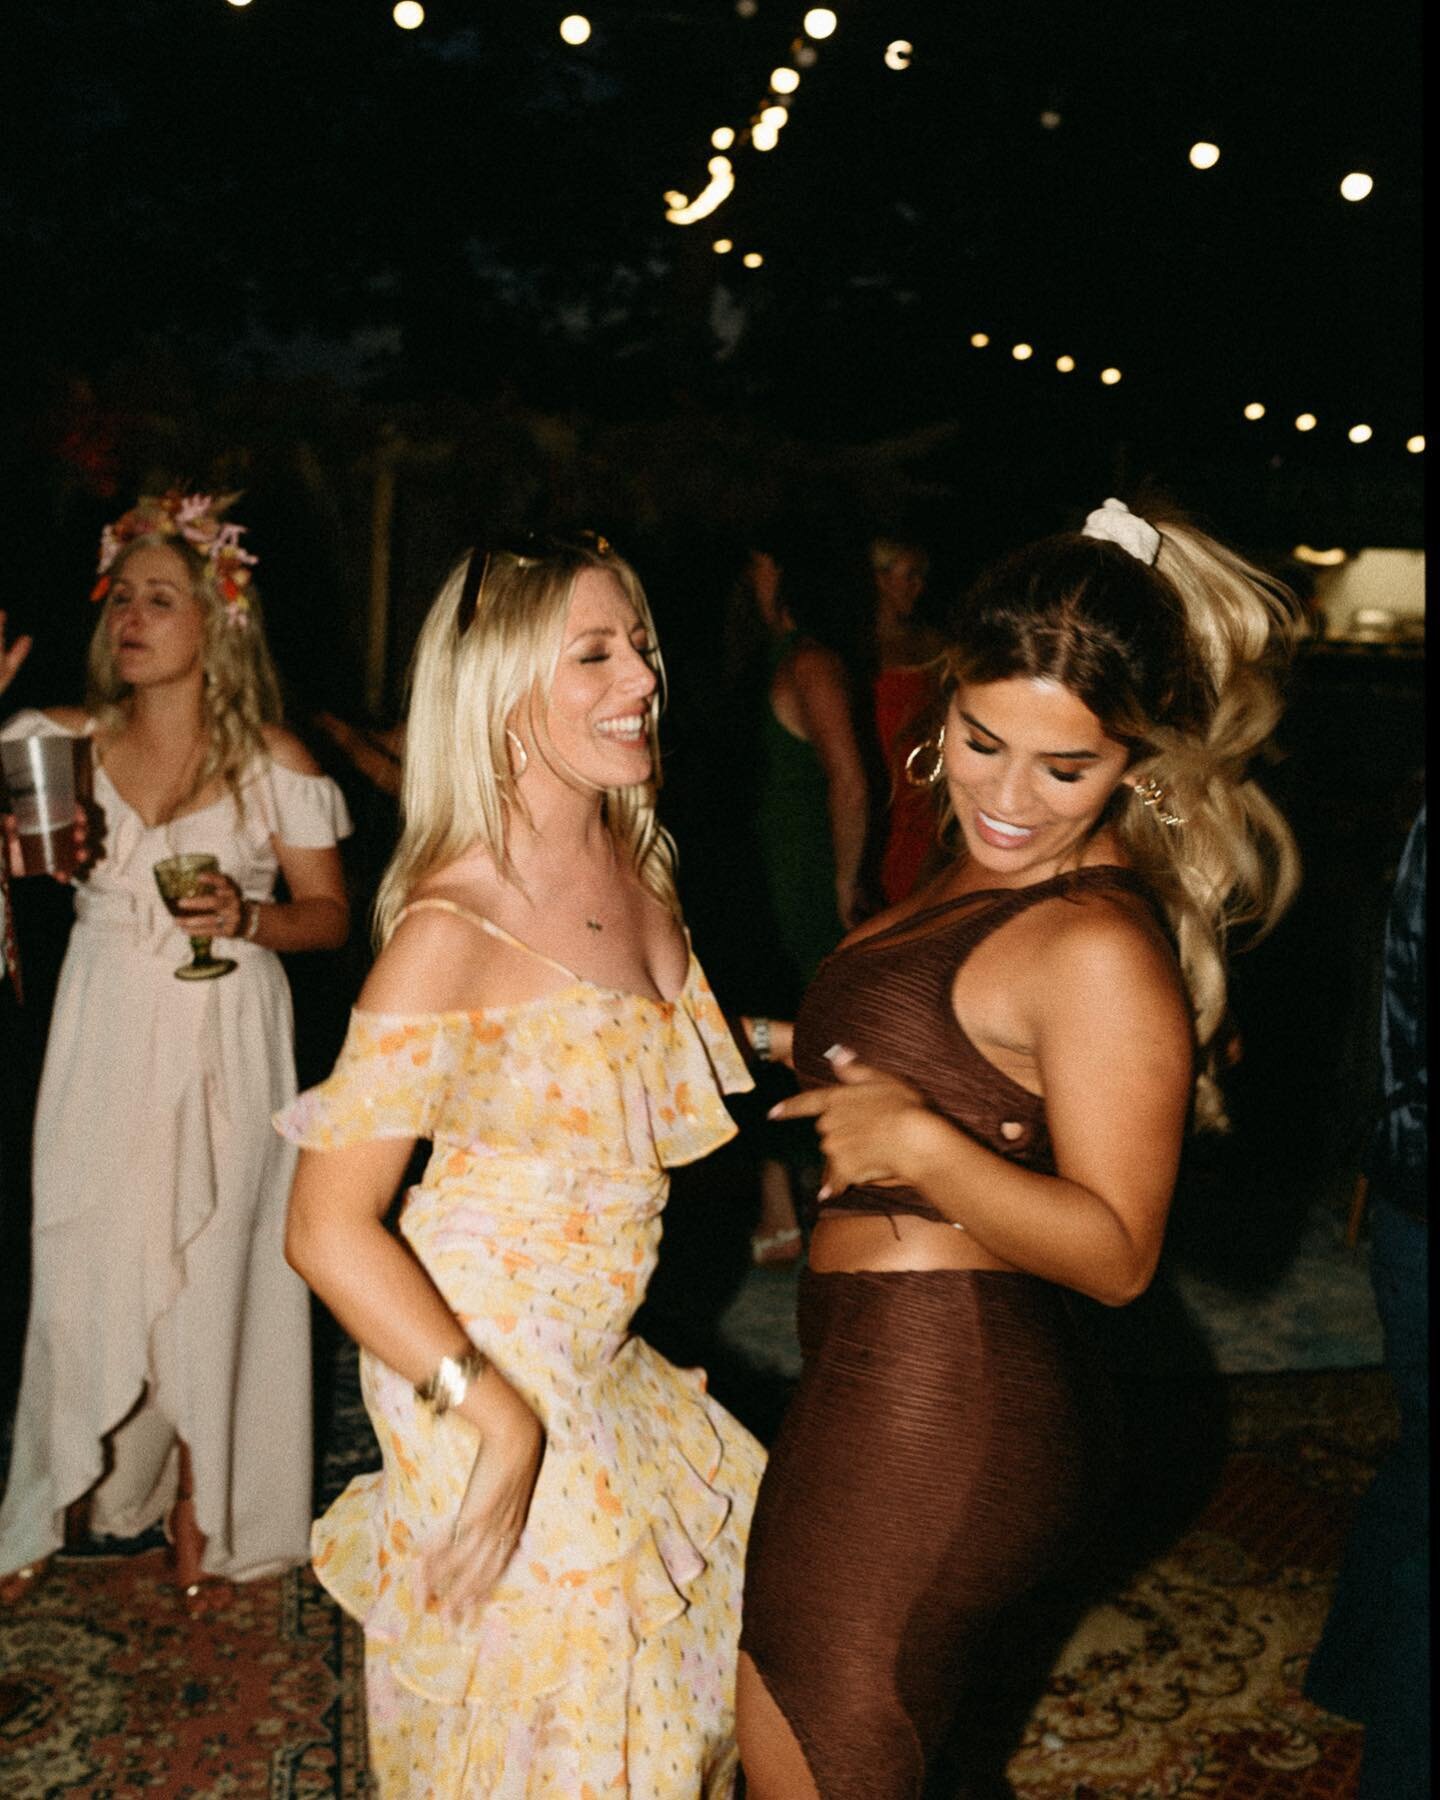 If this ain&rsquo;t enough inspo for your evening party, we don&rsquo;t know what is&hellip; summer weddings abroad in the South of France captured on a film look 📸
.
.
#weddinglook #weddingfilmmaking #weddingfilm #weddingphoto #weddinginspo #bestwe